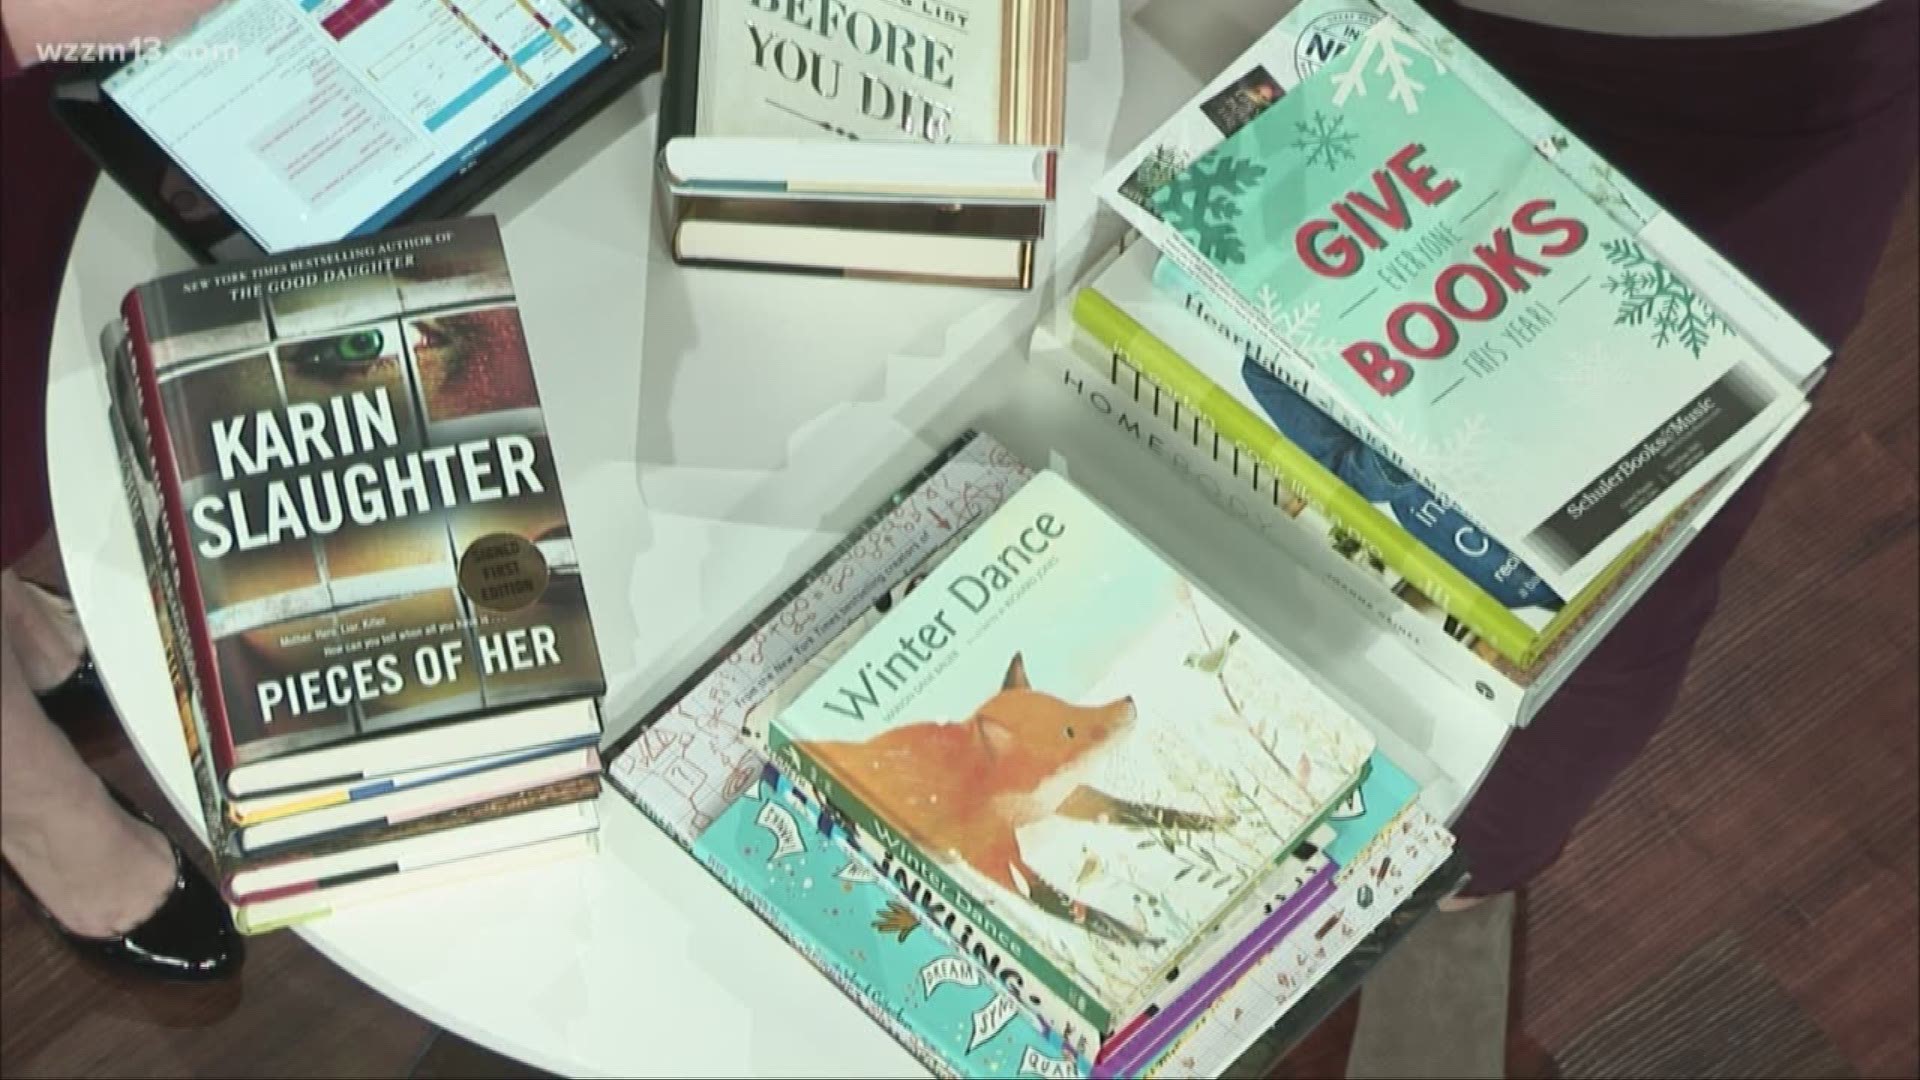 Alana Haley from Schuler Books tells the weekend crew why books are good gifts!